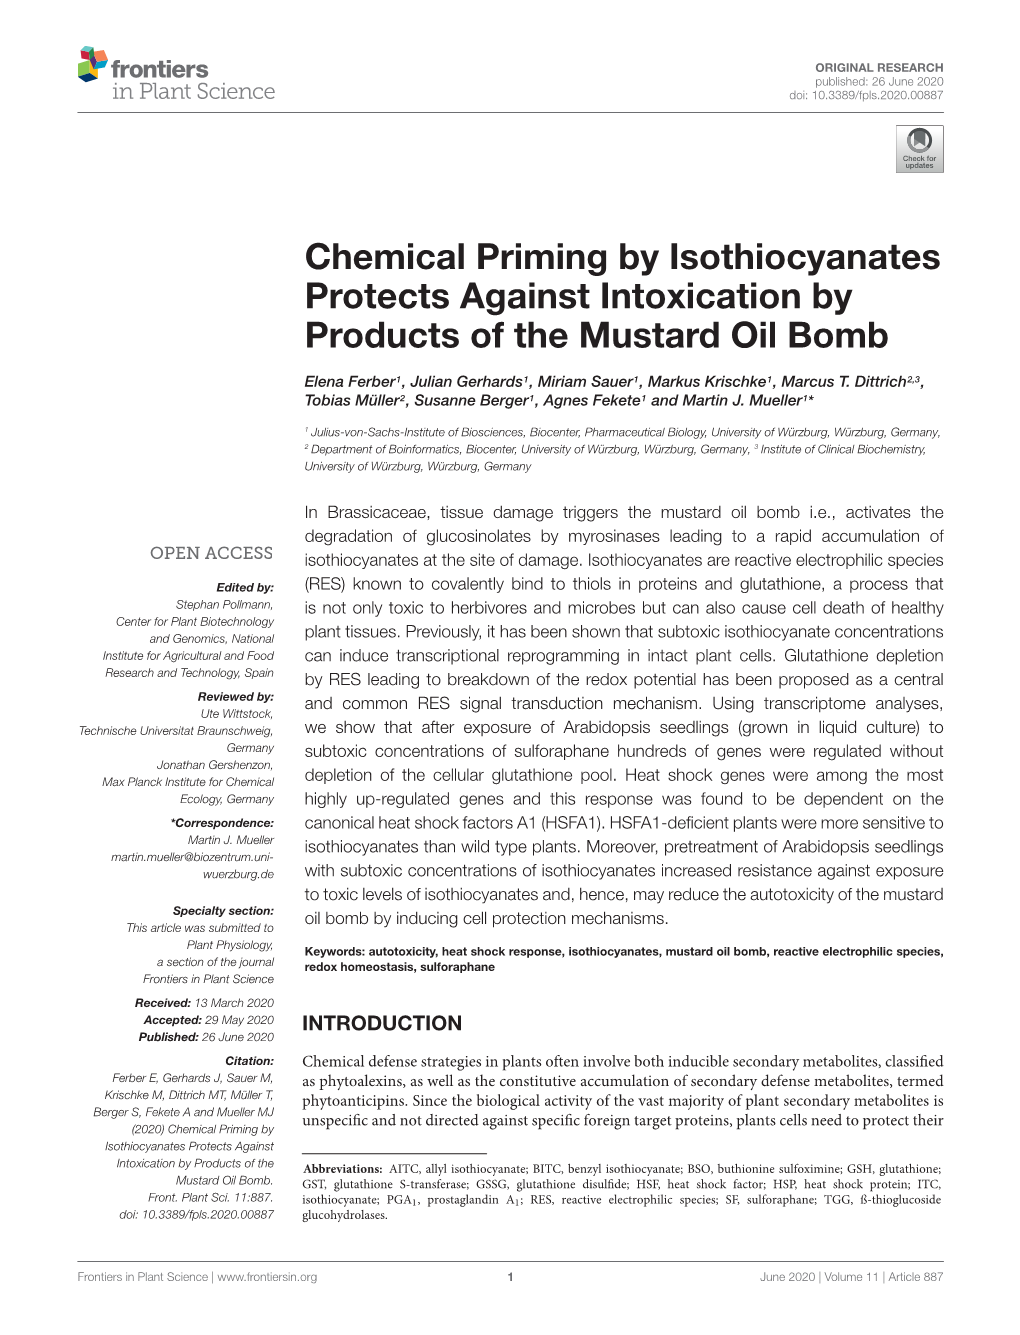 Chemical Priming by Isothiocyanates Protects Against Intoxication by Products of the Mustard Oil Bomb